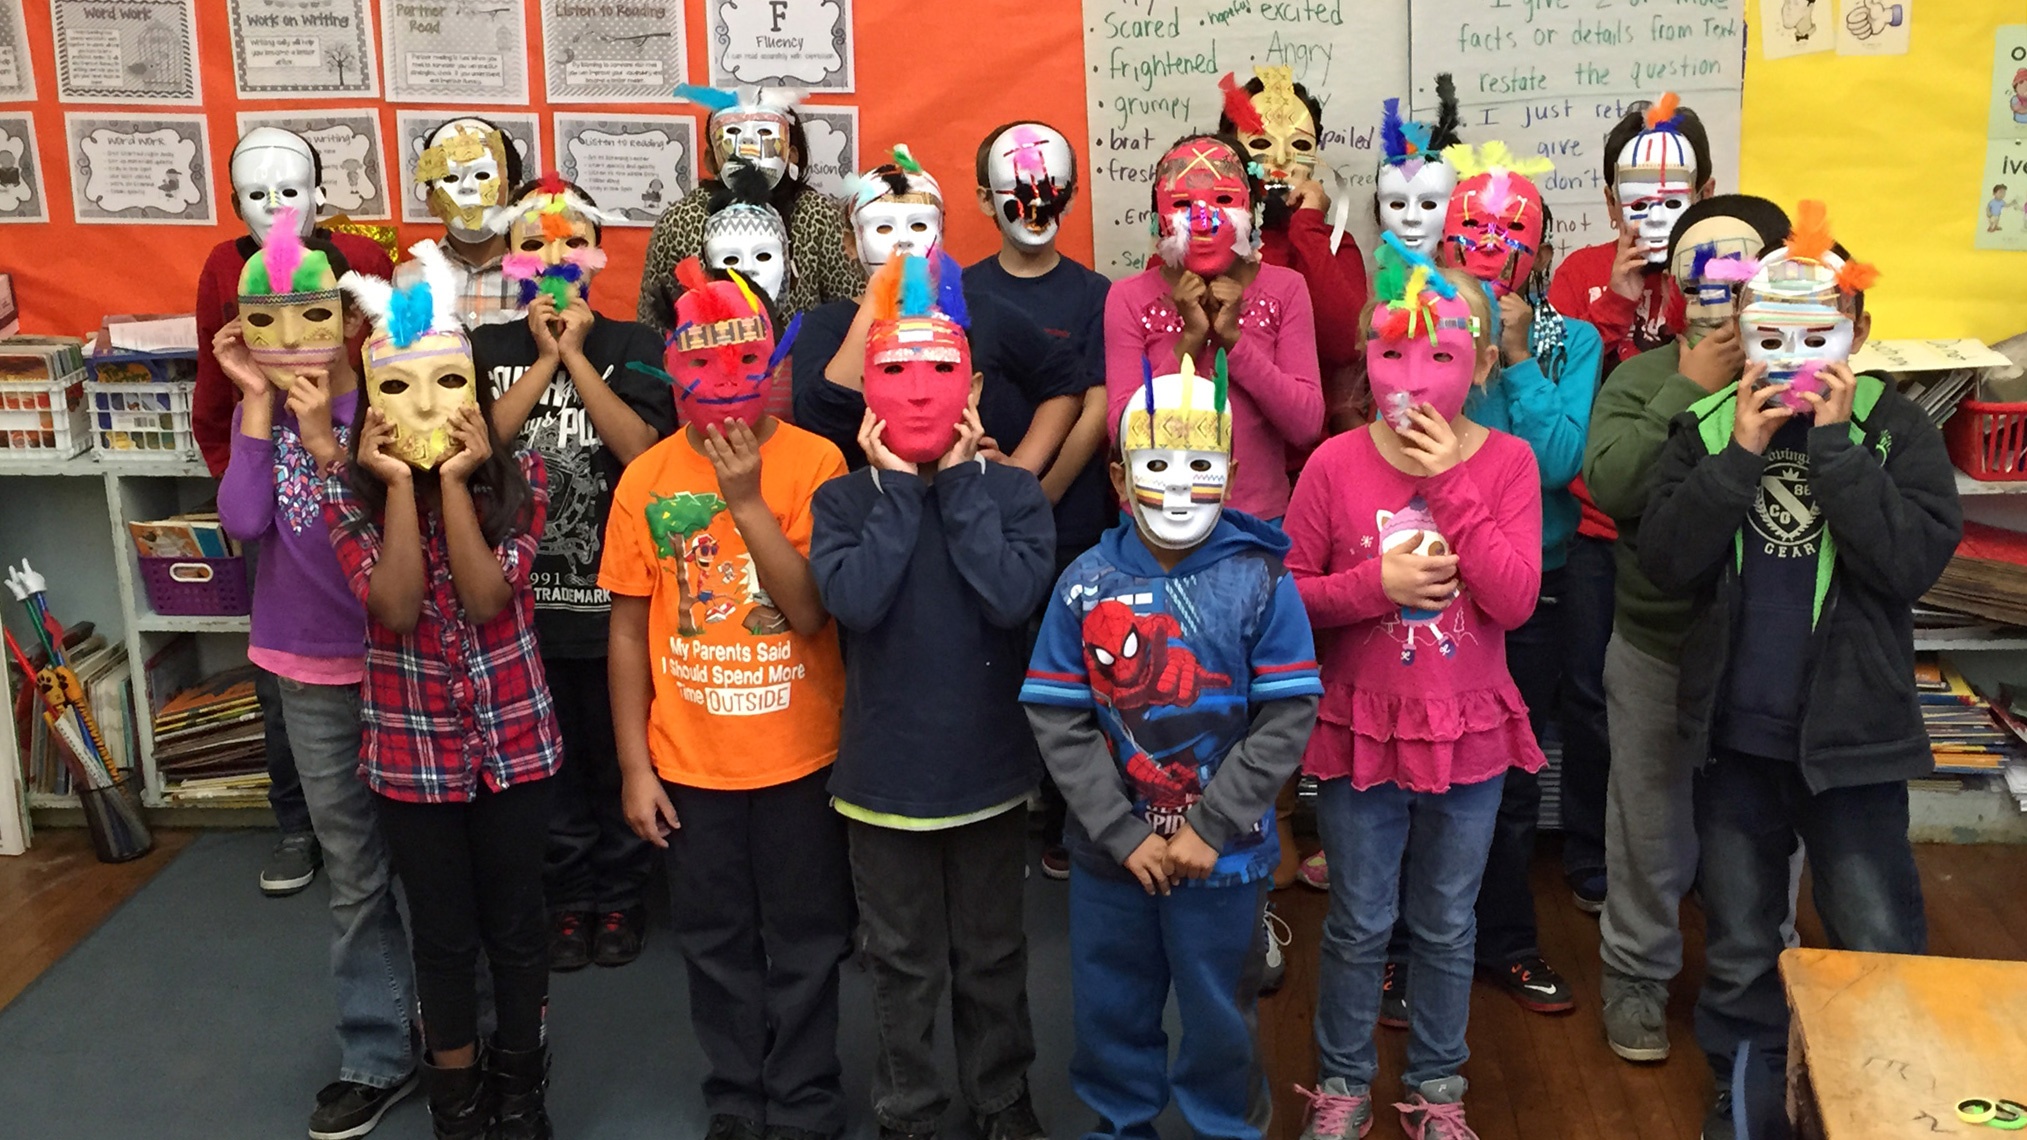 A group of children wearing colorful, handmade masks in front of an orange and yellow wall.